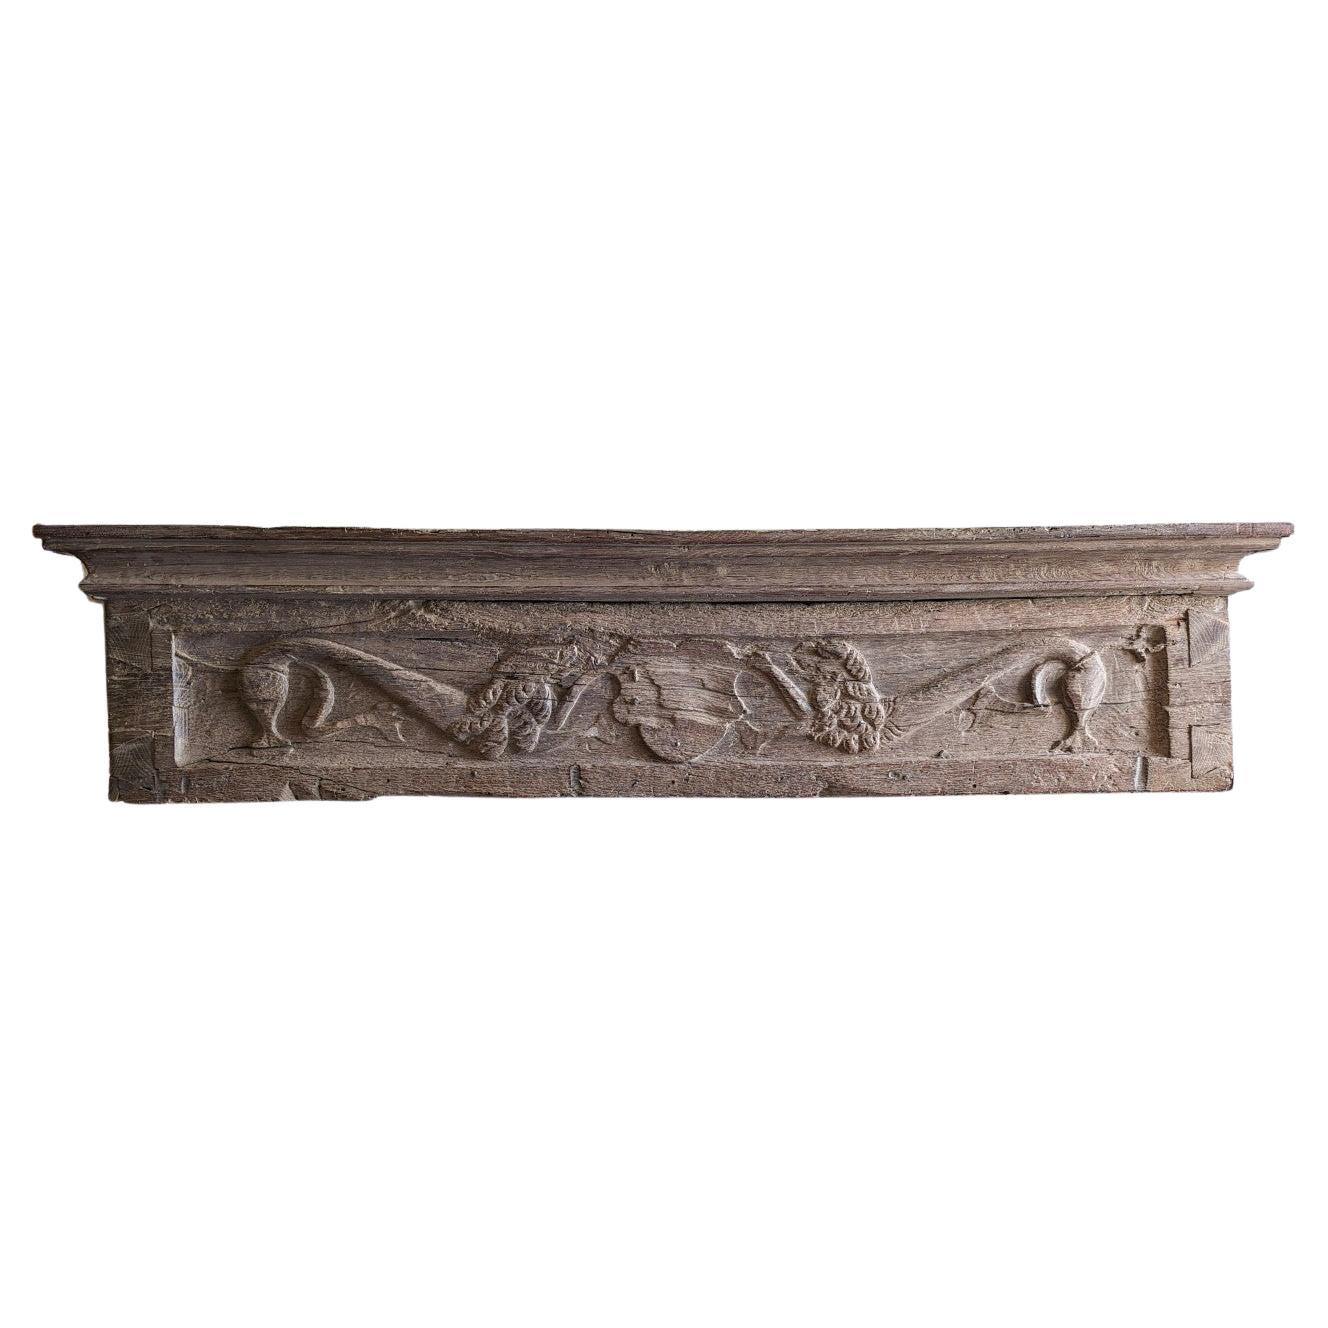 Antique Wood Fireplace Mantel with Carved Lions Rampant Heraldry Shield For Sale